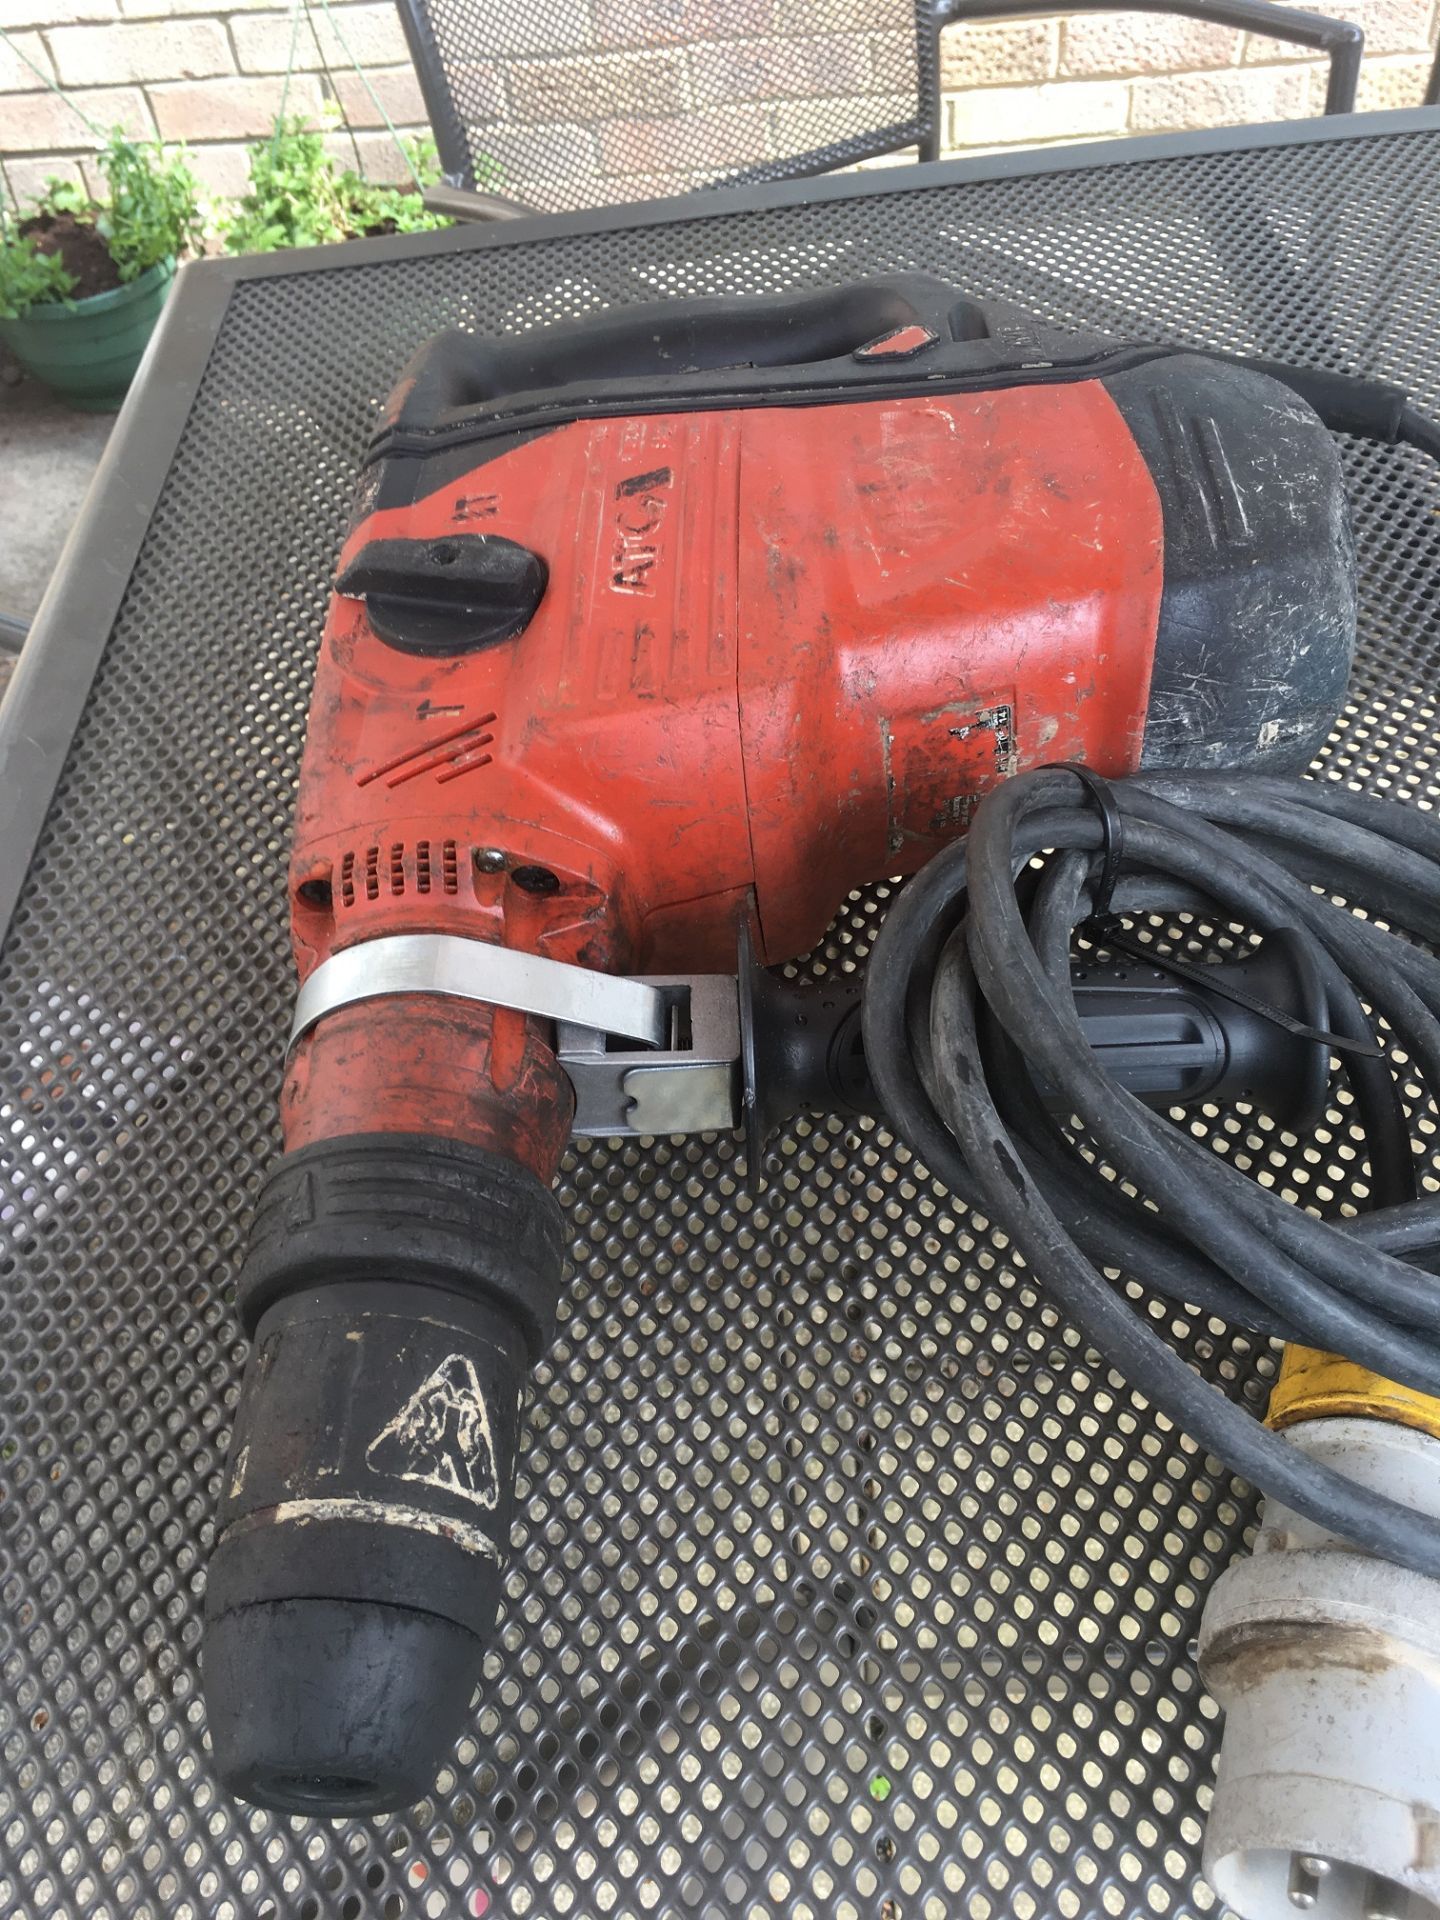 1 x HILTI TE 60 AVR 110v HAMMER DRILL AND BREAKER WITHOUT BOX *NO VAT* - Image 3 of 3